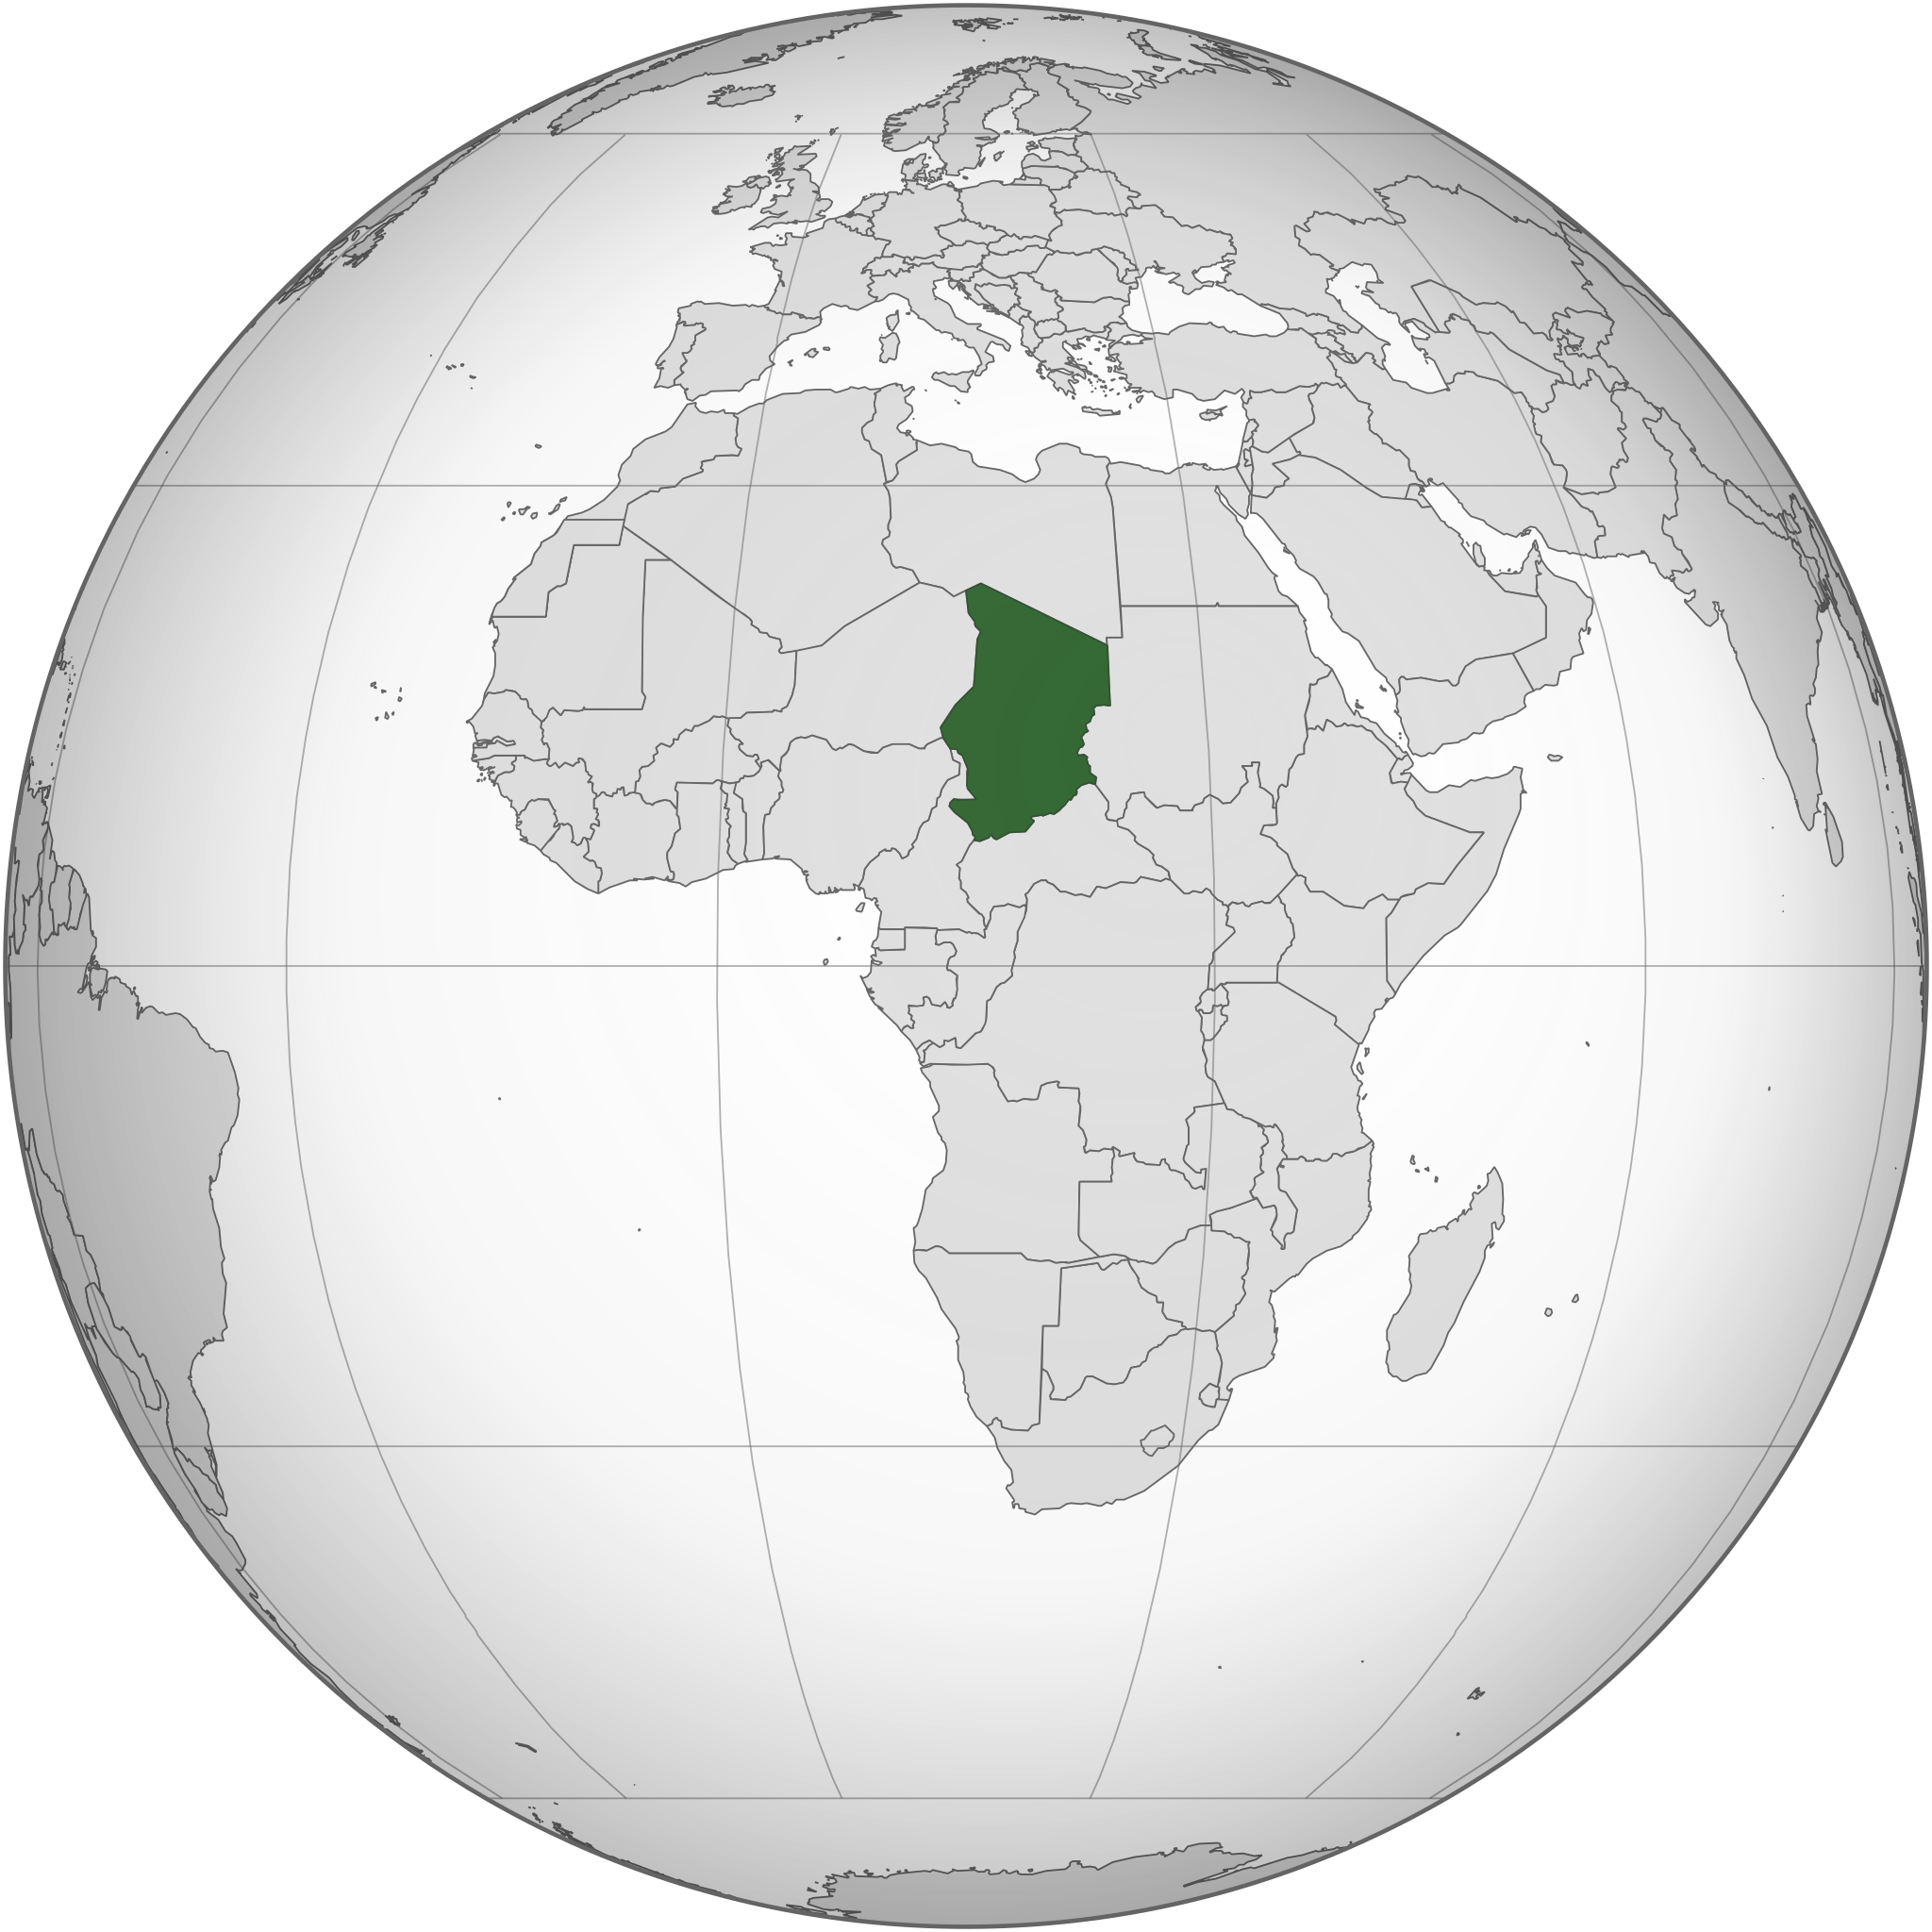 Chad is a north-central African country south of Libya, west of Sudan, east of Niger and Nigeria, and north of the Central African Republic.